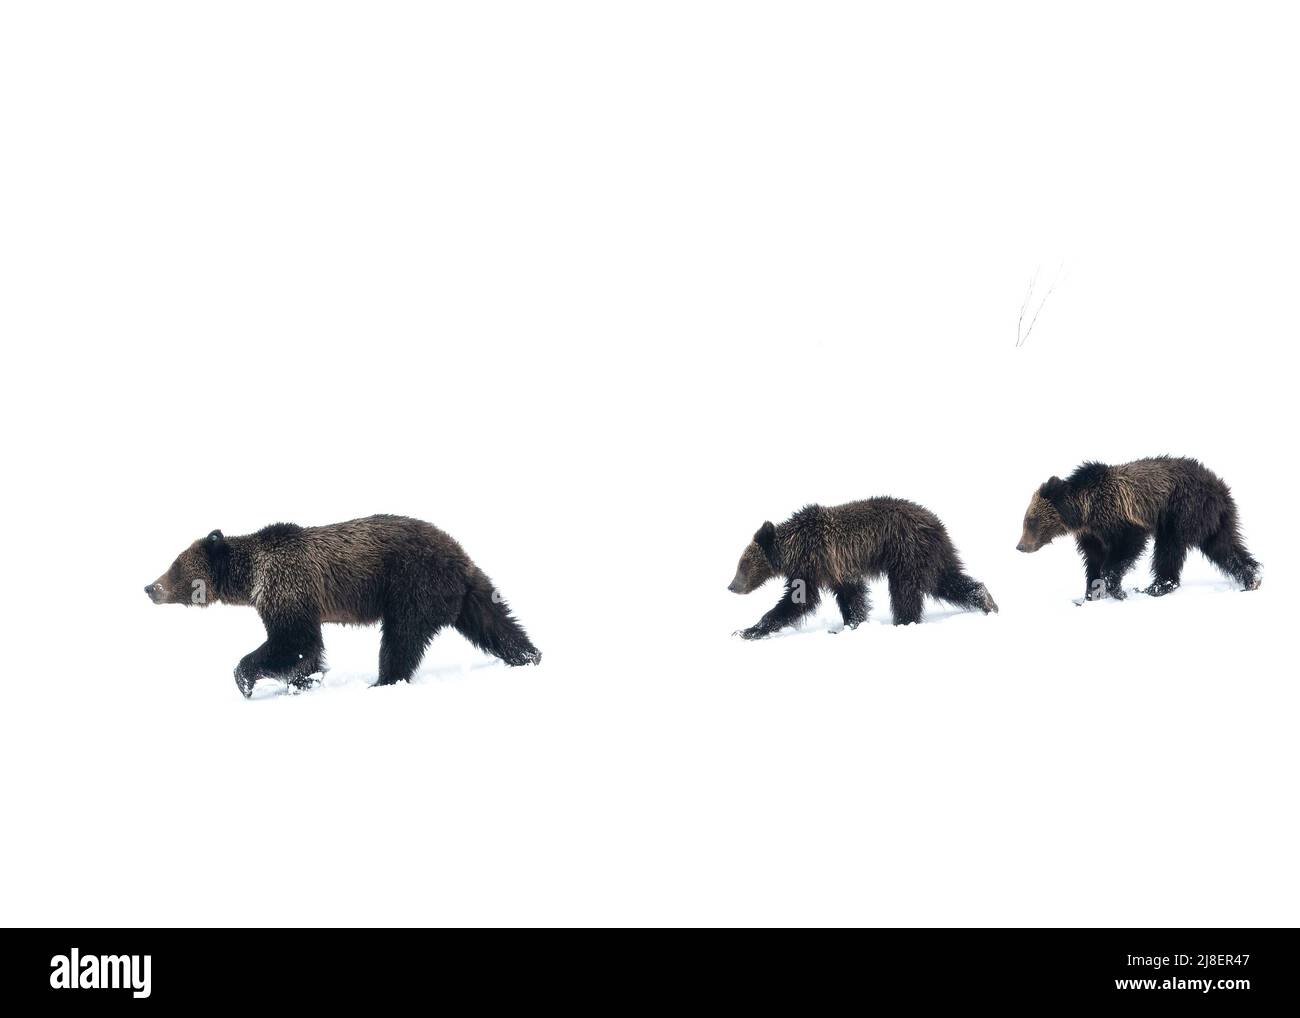 Grizzly Bear (Ursus arctos horribilis) Sow with two cubs in snow, Wyoming, USA Stock Photo